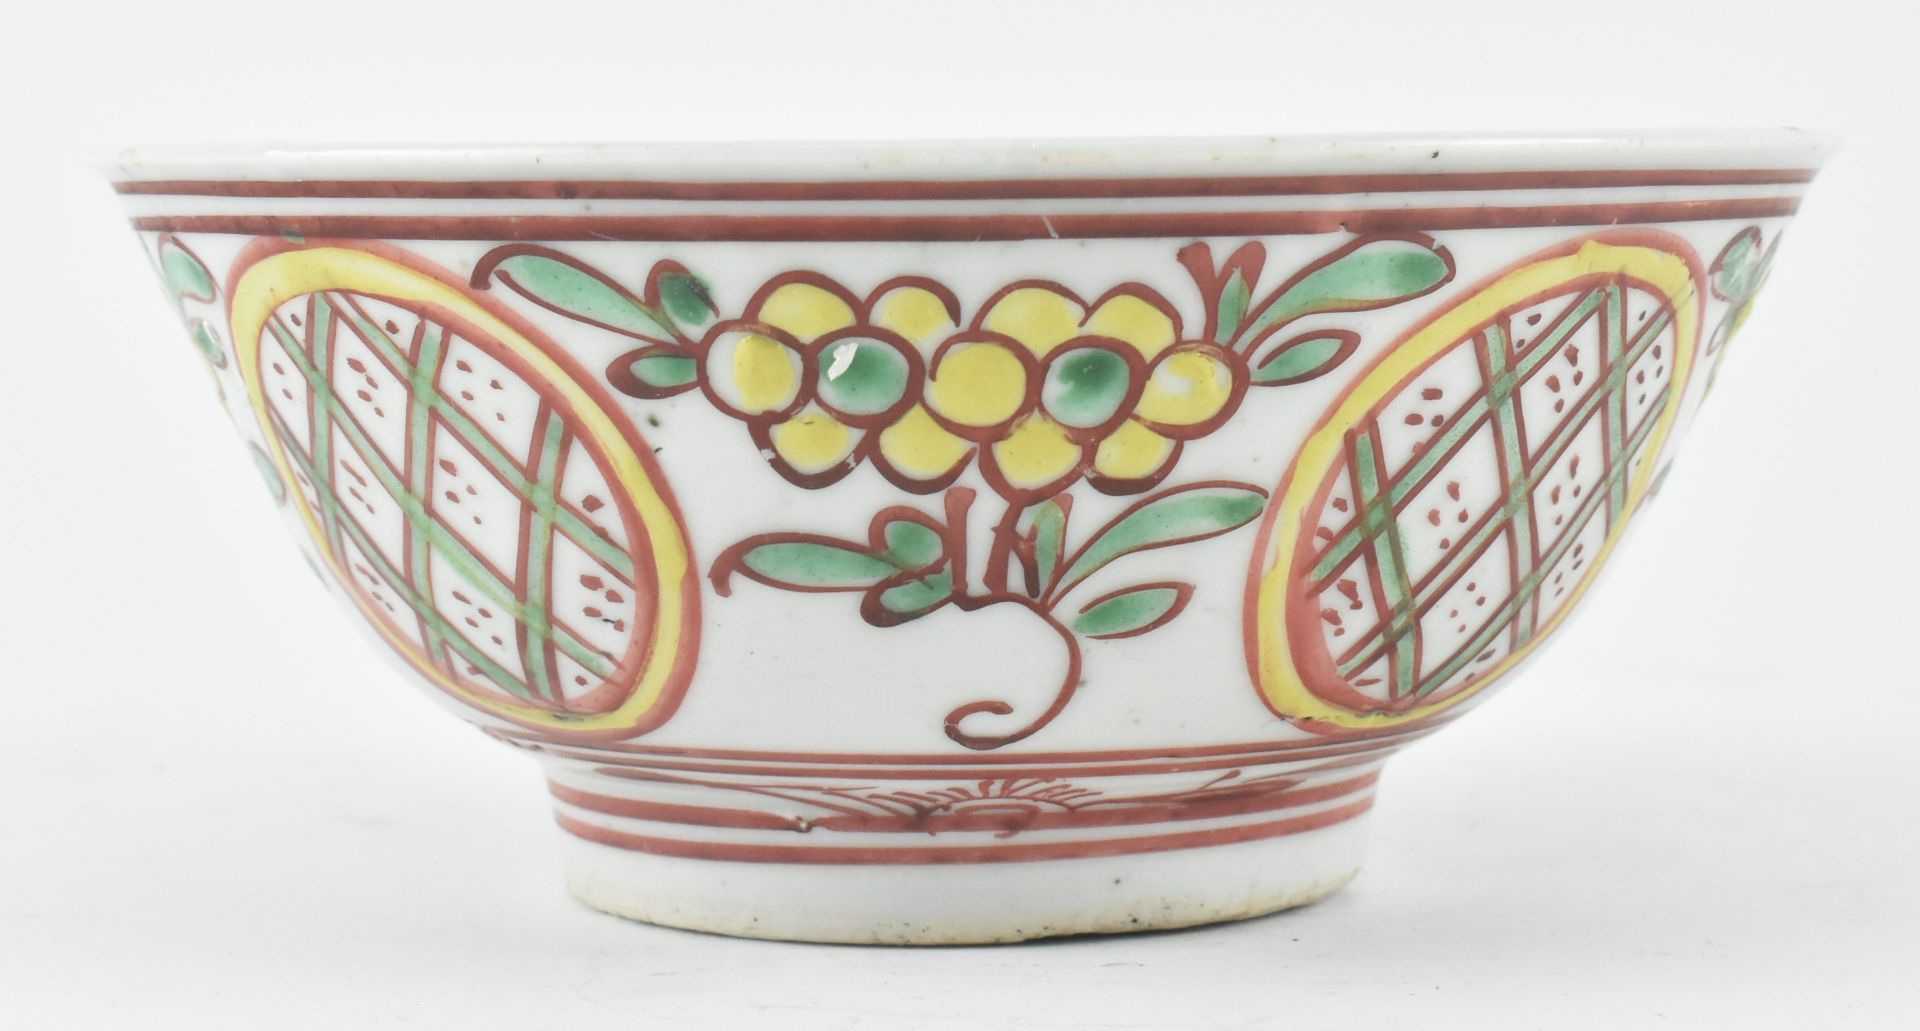 MING OR LATER TRI-COLOURED BOWL 明 红黄绿彩绘碗 - Image 2 of 6